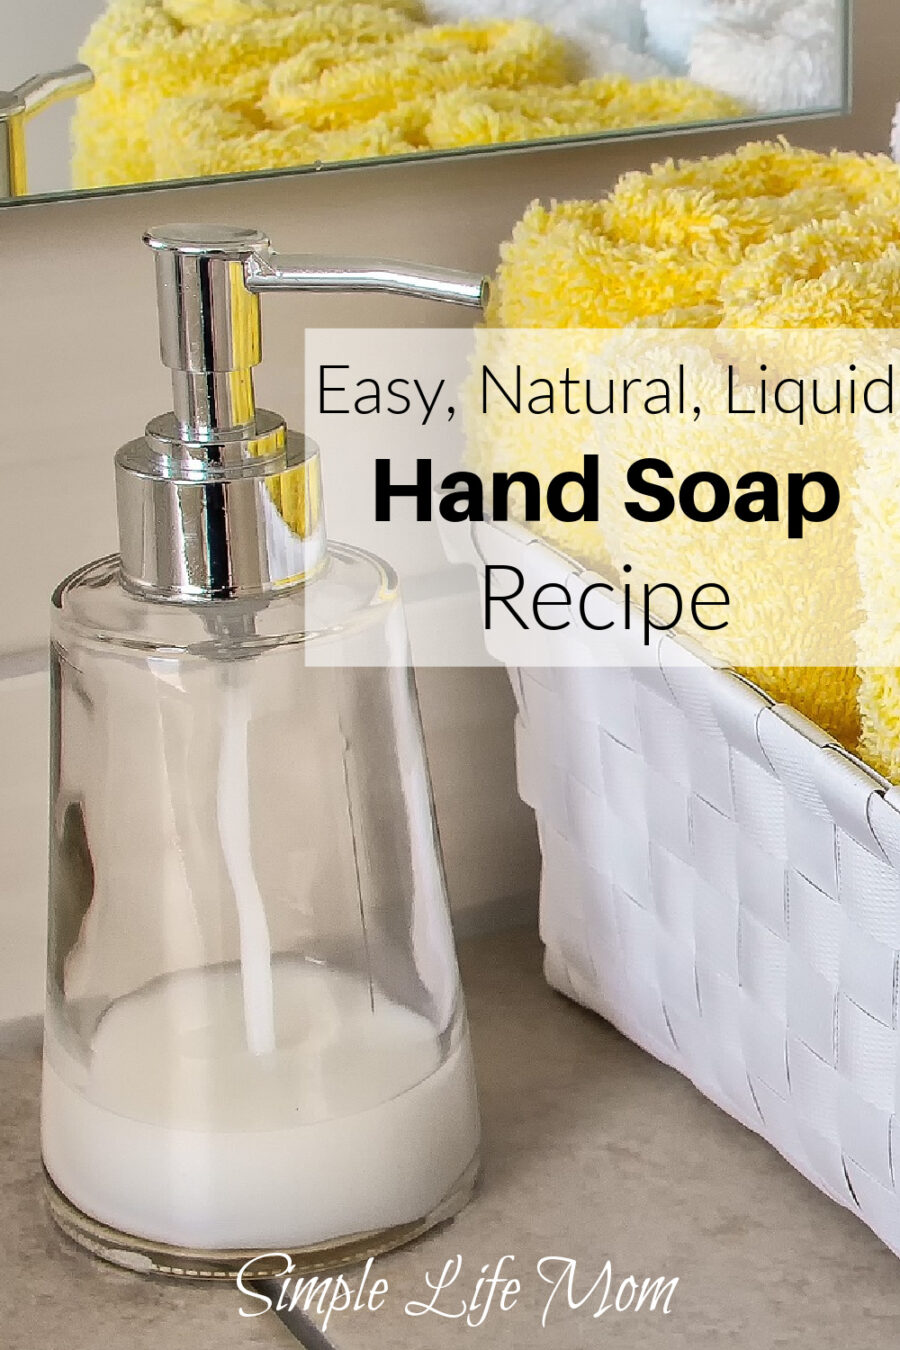 Learn how to make your own liquid hand soap from scratch with this easy and natural recipe from Simple Life Mom